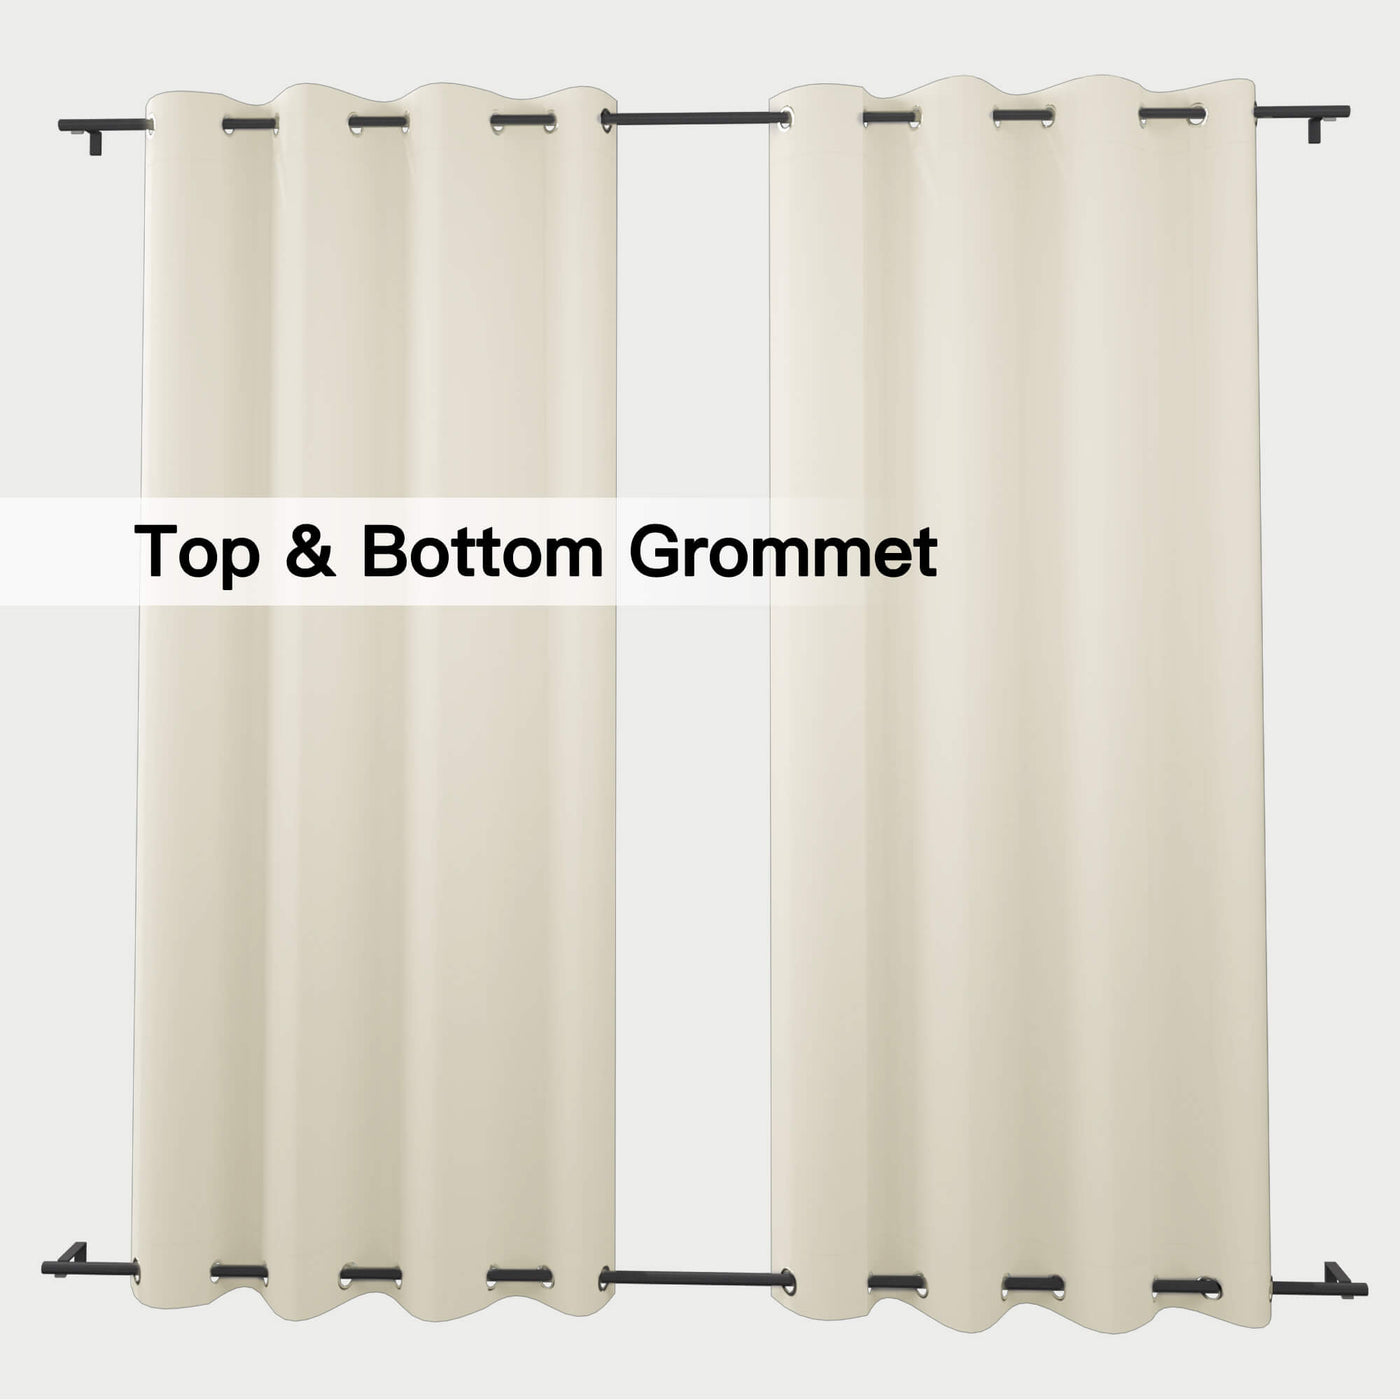 Heartcosy Thermal Curtains/Drapes 1 Panel Beige | Waterproof Curtains Grommet/Tab Top | Custom Blackout Curtains